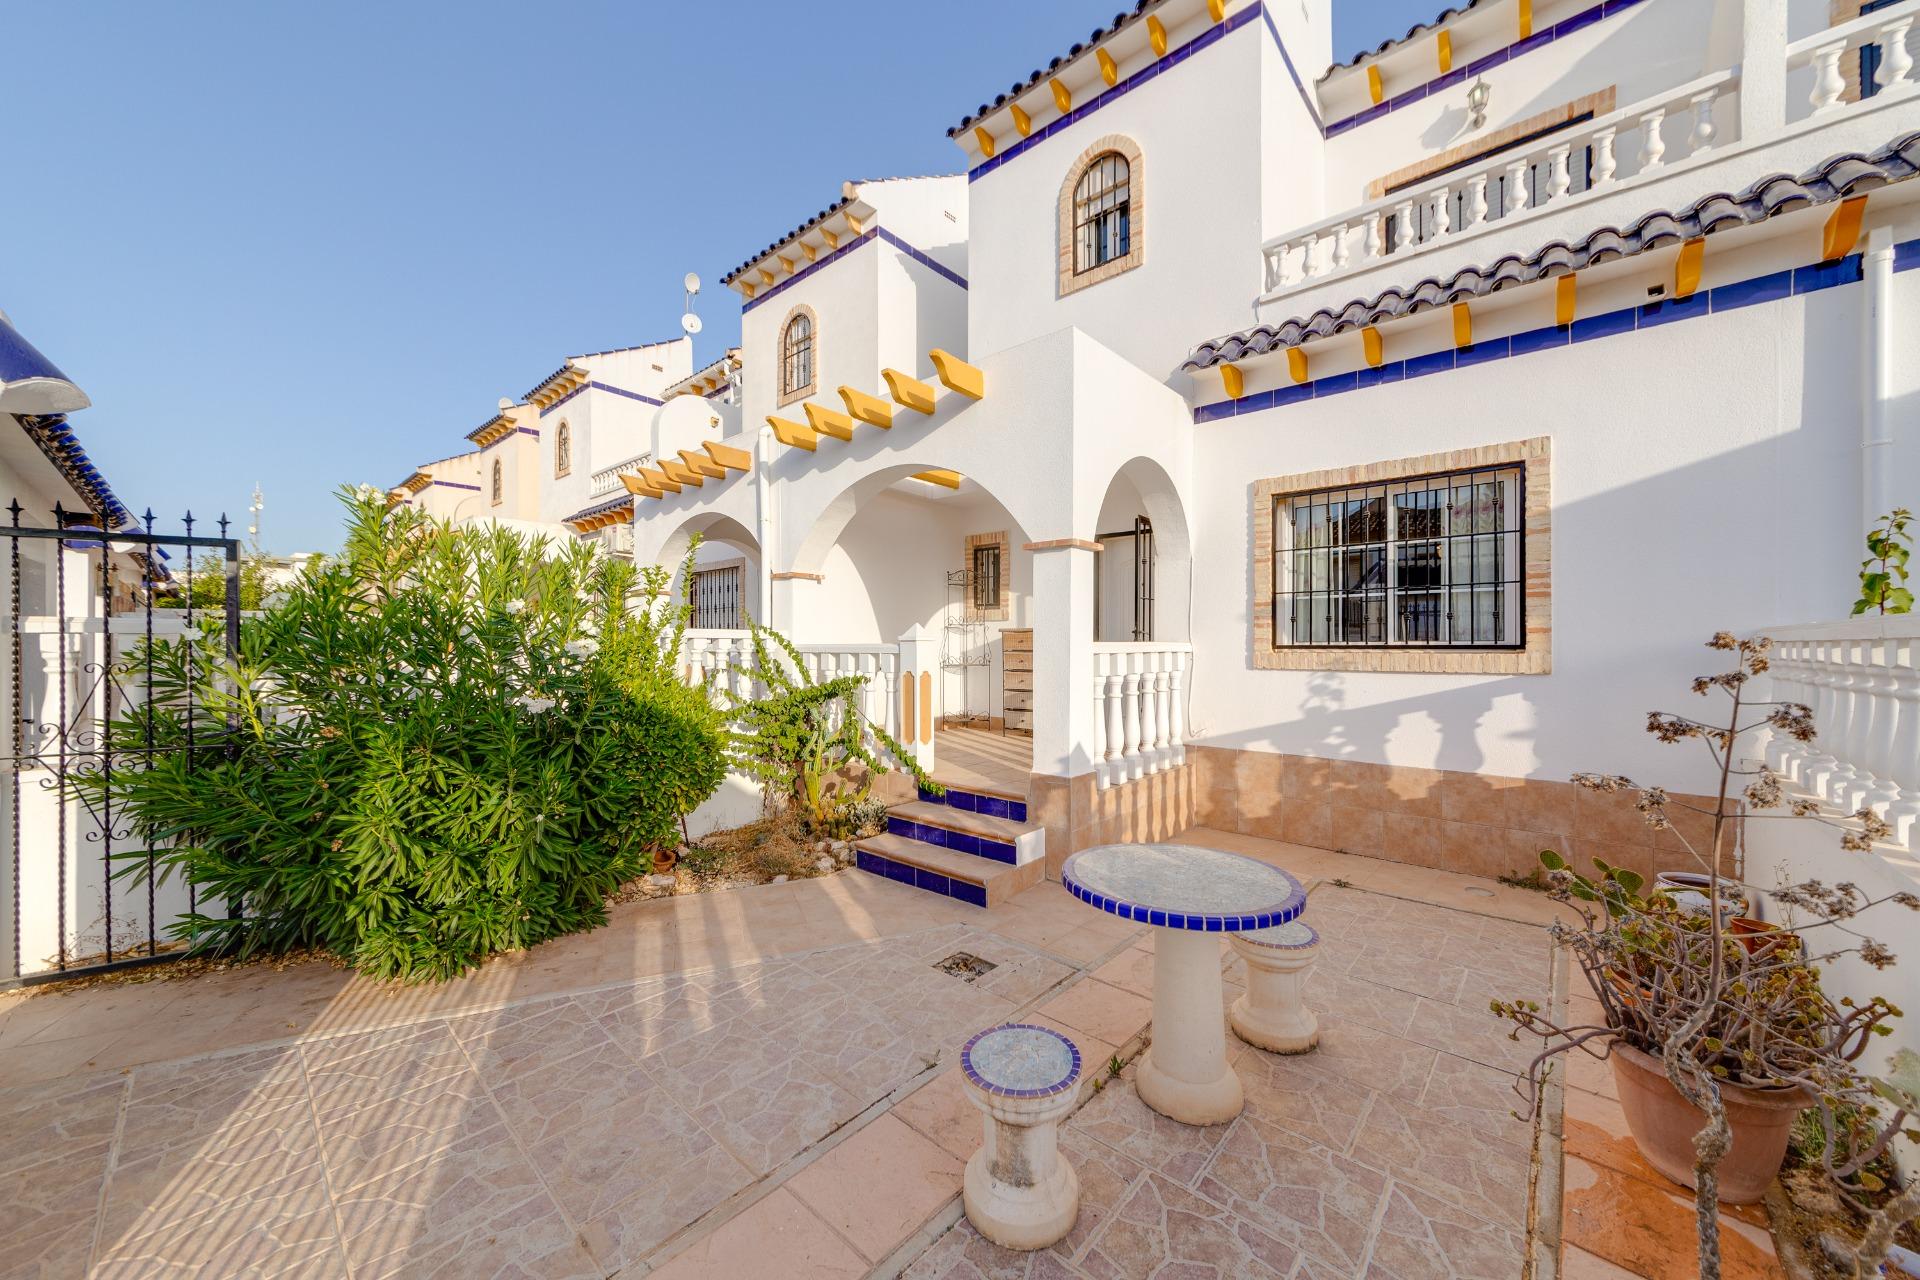 Well-maintained townhouse for sale in a quiet residential area with facilities in La Florida, Orihuela Costa.